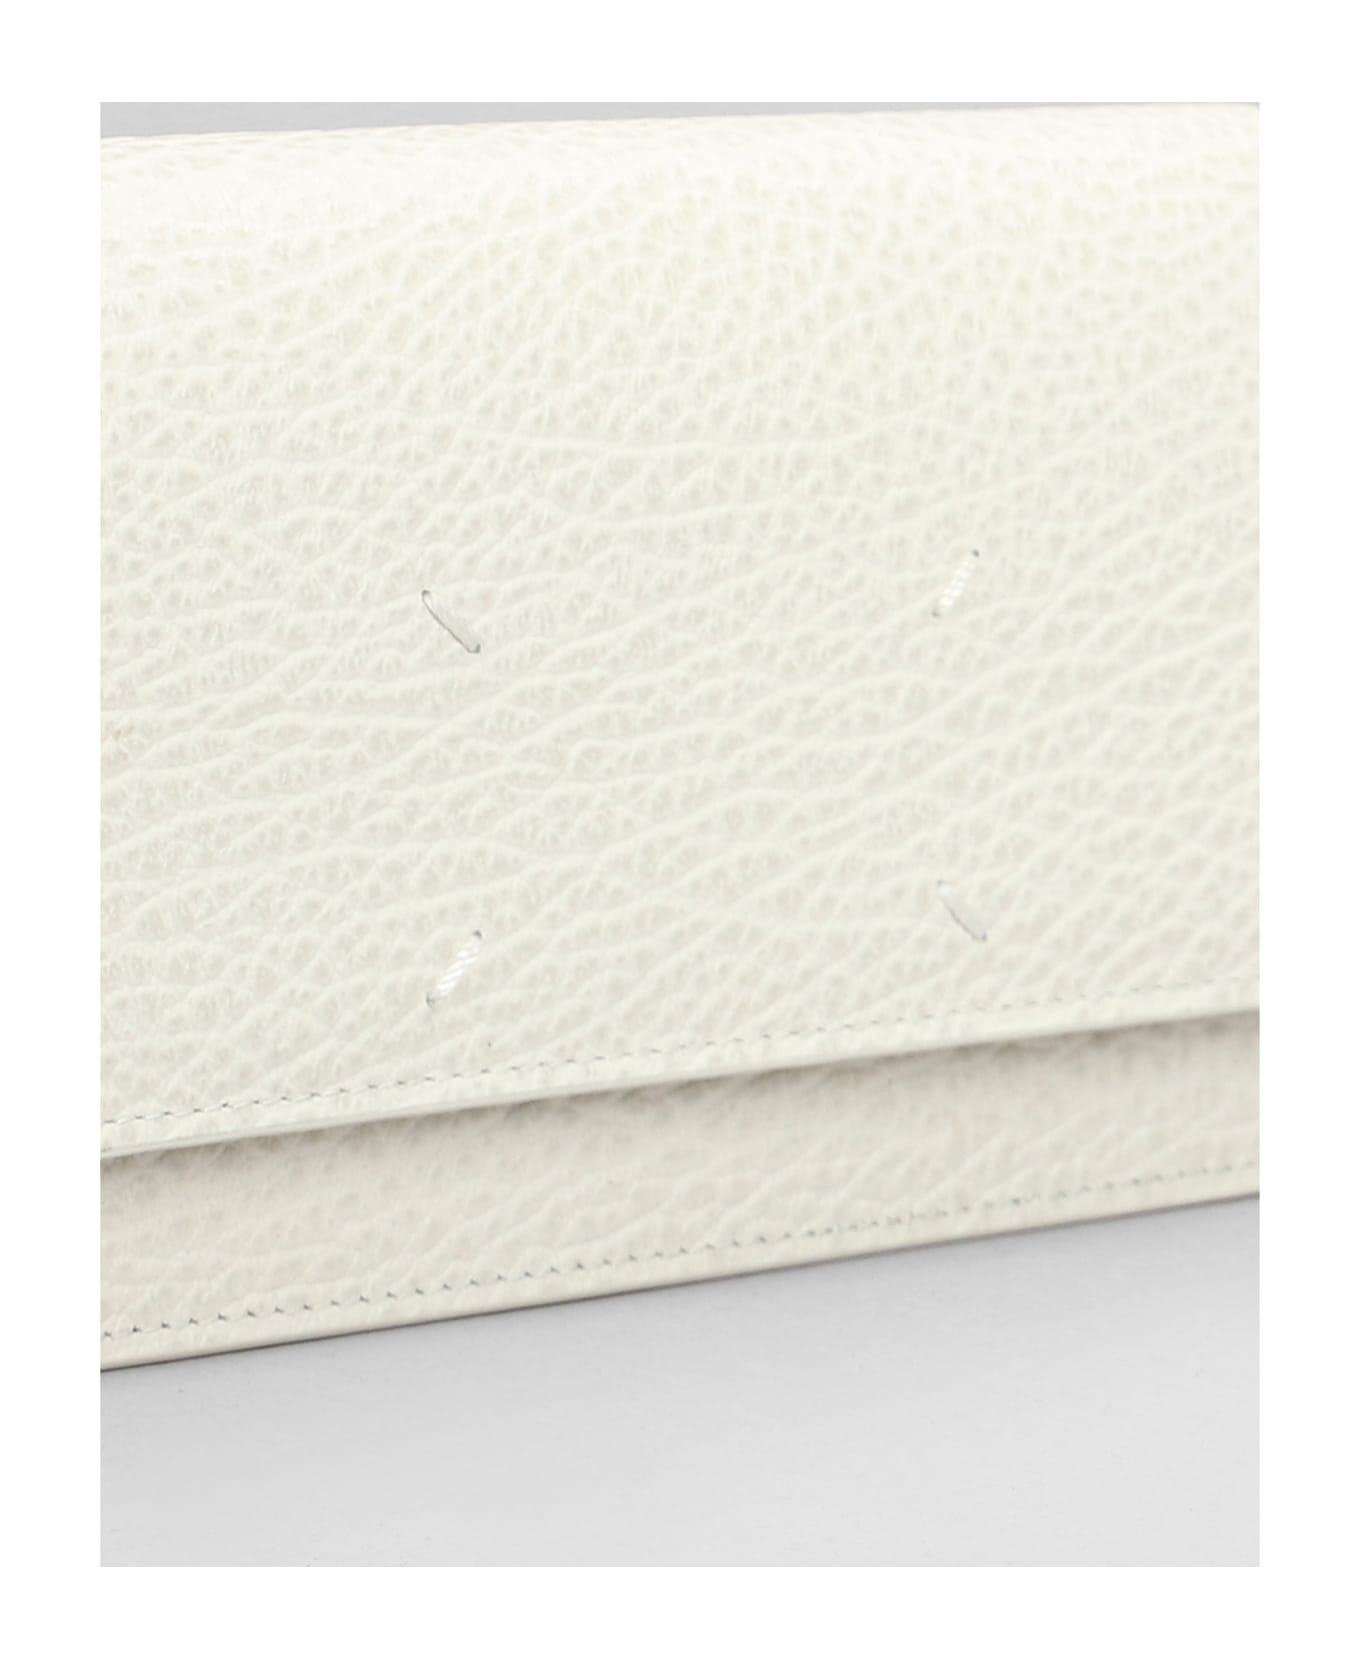 Maison Margiela Large Wallet With Chain - WHITE